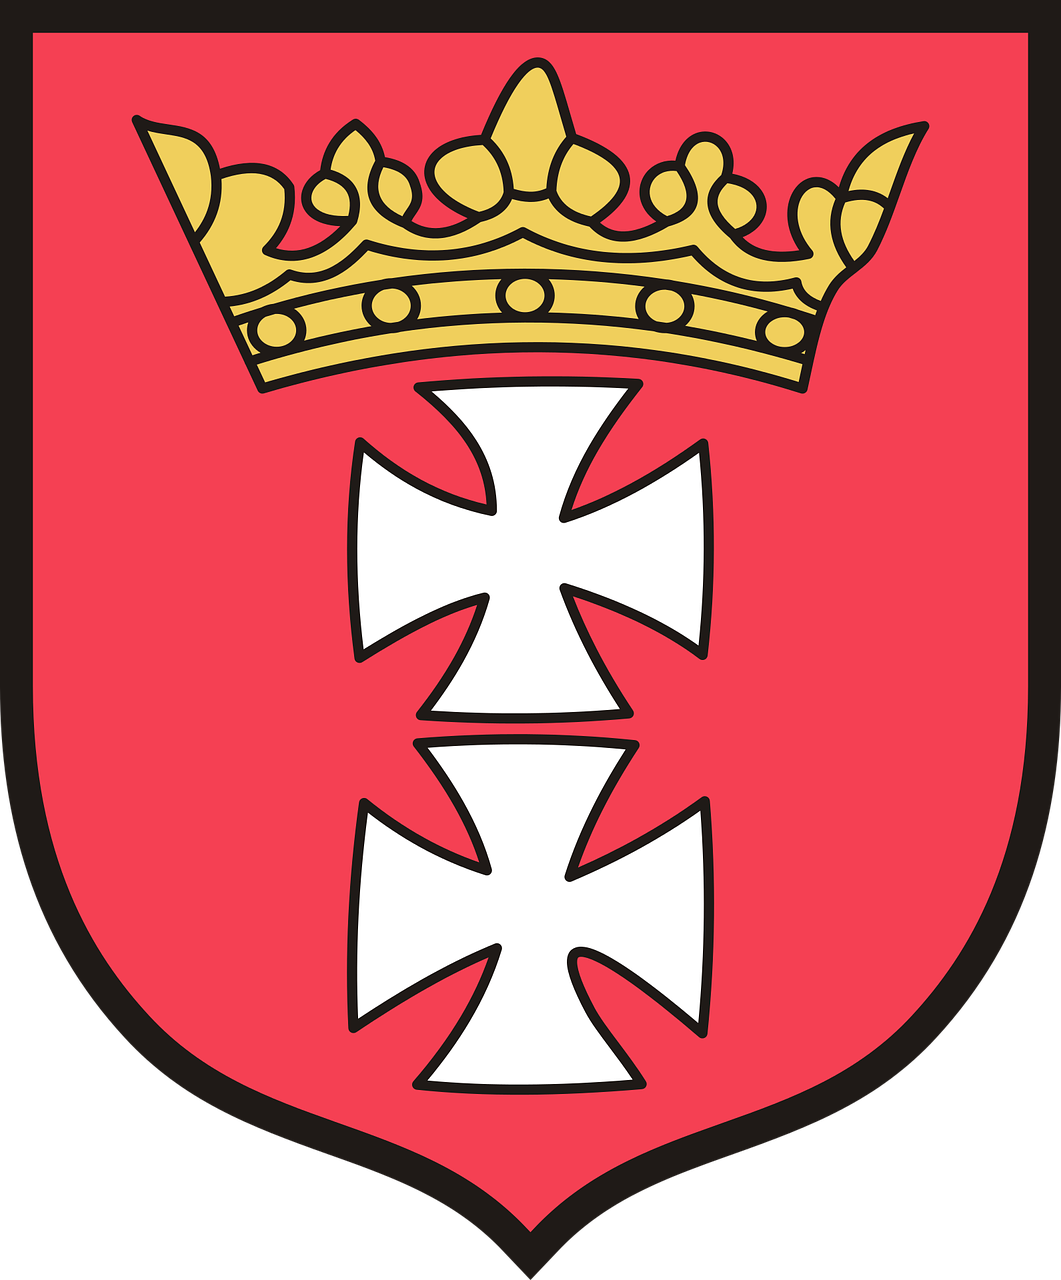 Gdansk coat of arms. Polish dialects from Pomeranian family are spoken there